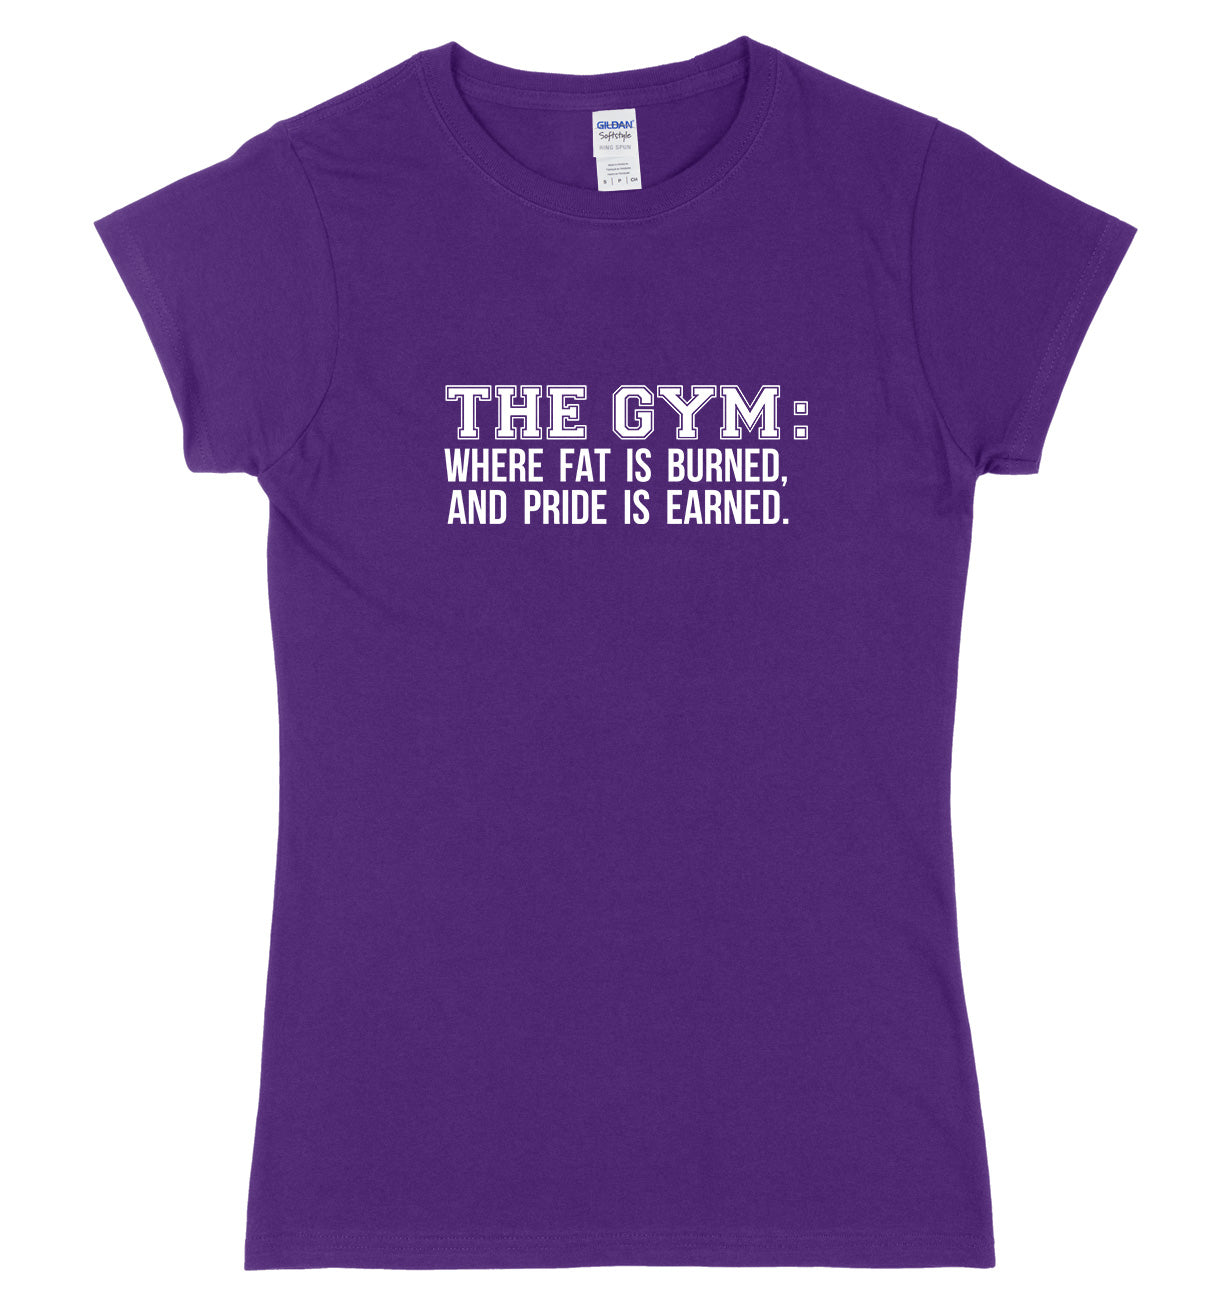 The Gym: Where Fat Is Burned And Pride Is Earned Womens Ladies Slim Fit T-Shirt